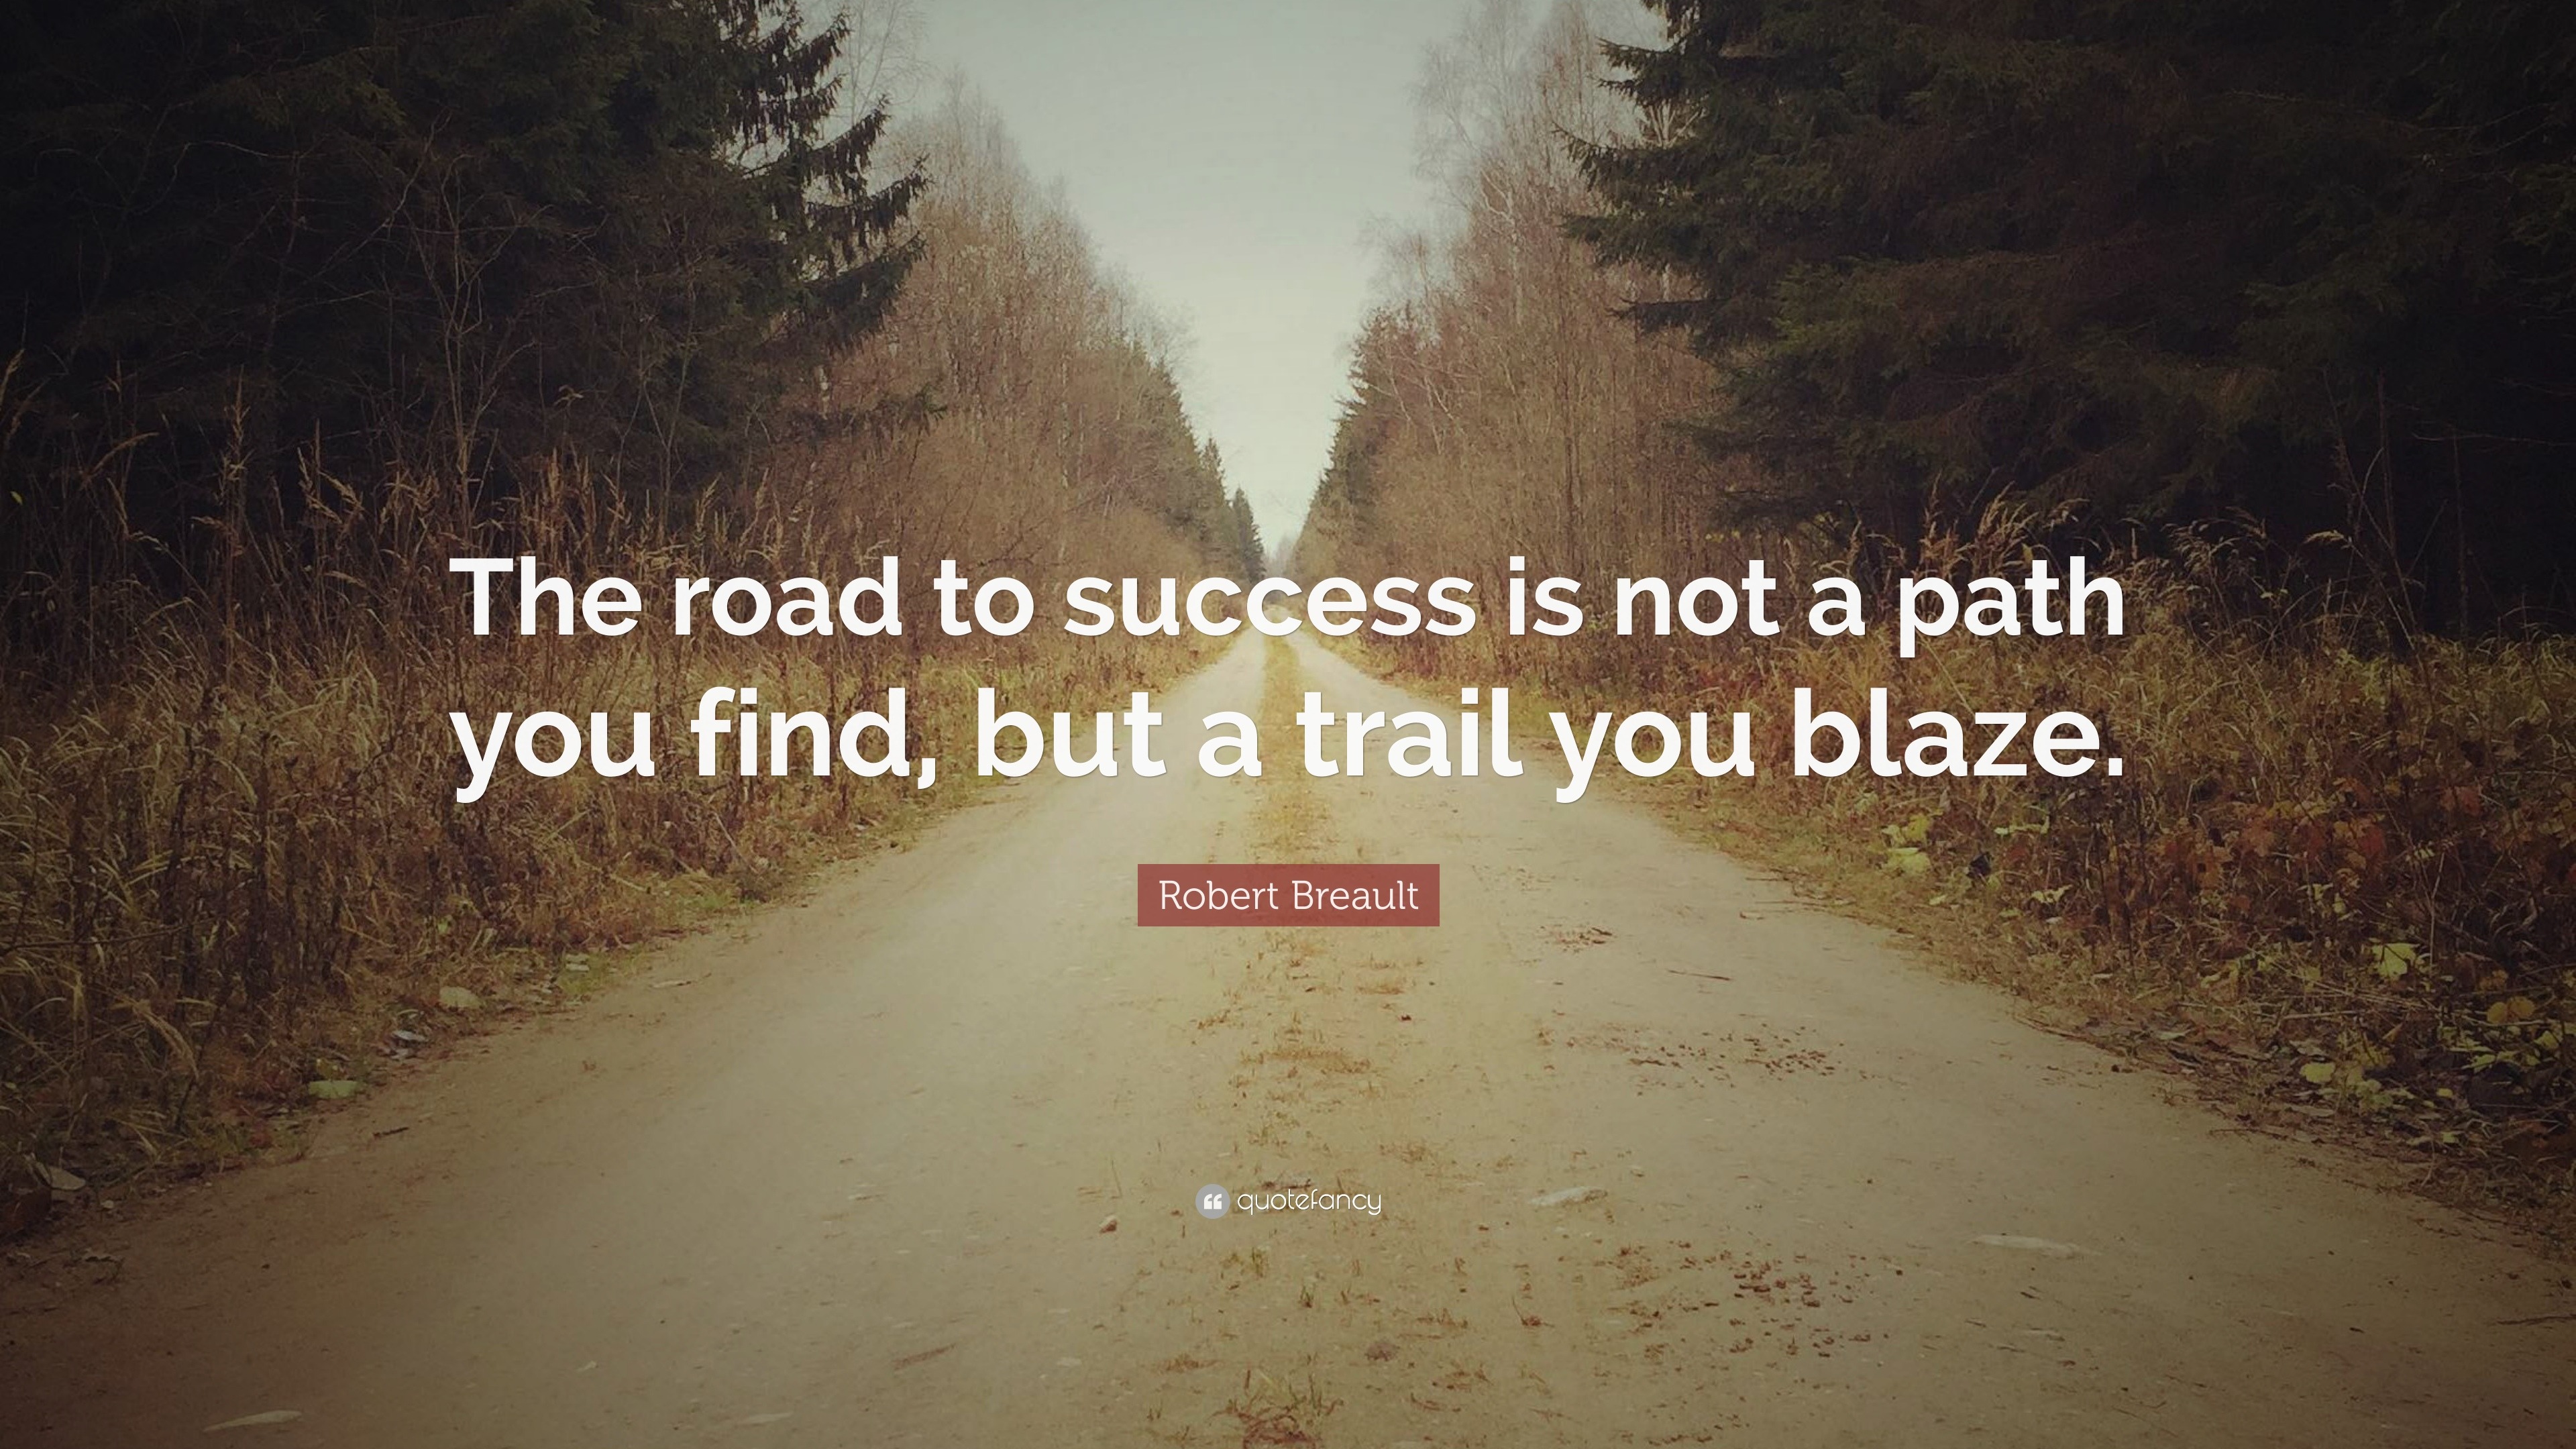 Robert Breault Quote “the Road To Success Is Not A Path You Find But A Trail You Blaze” 7095